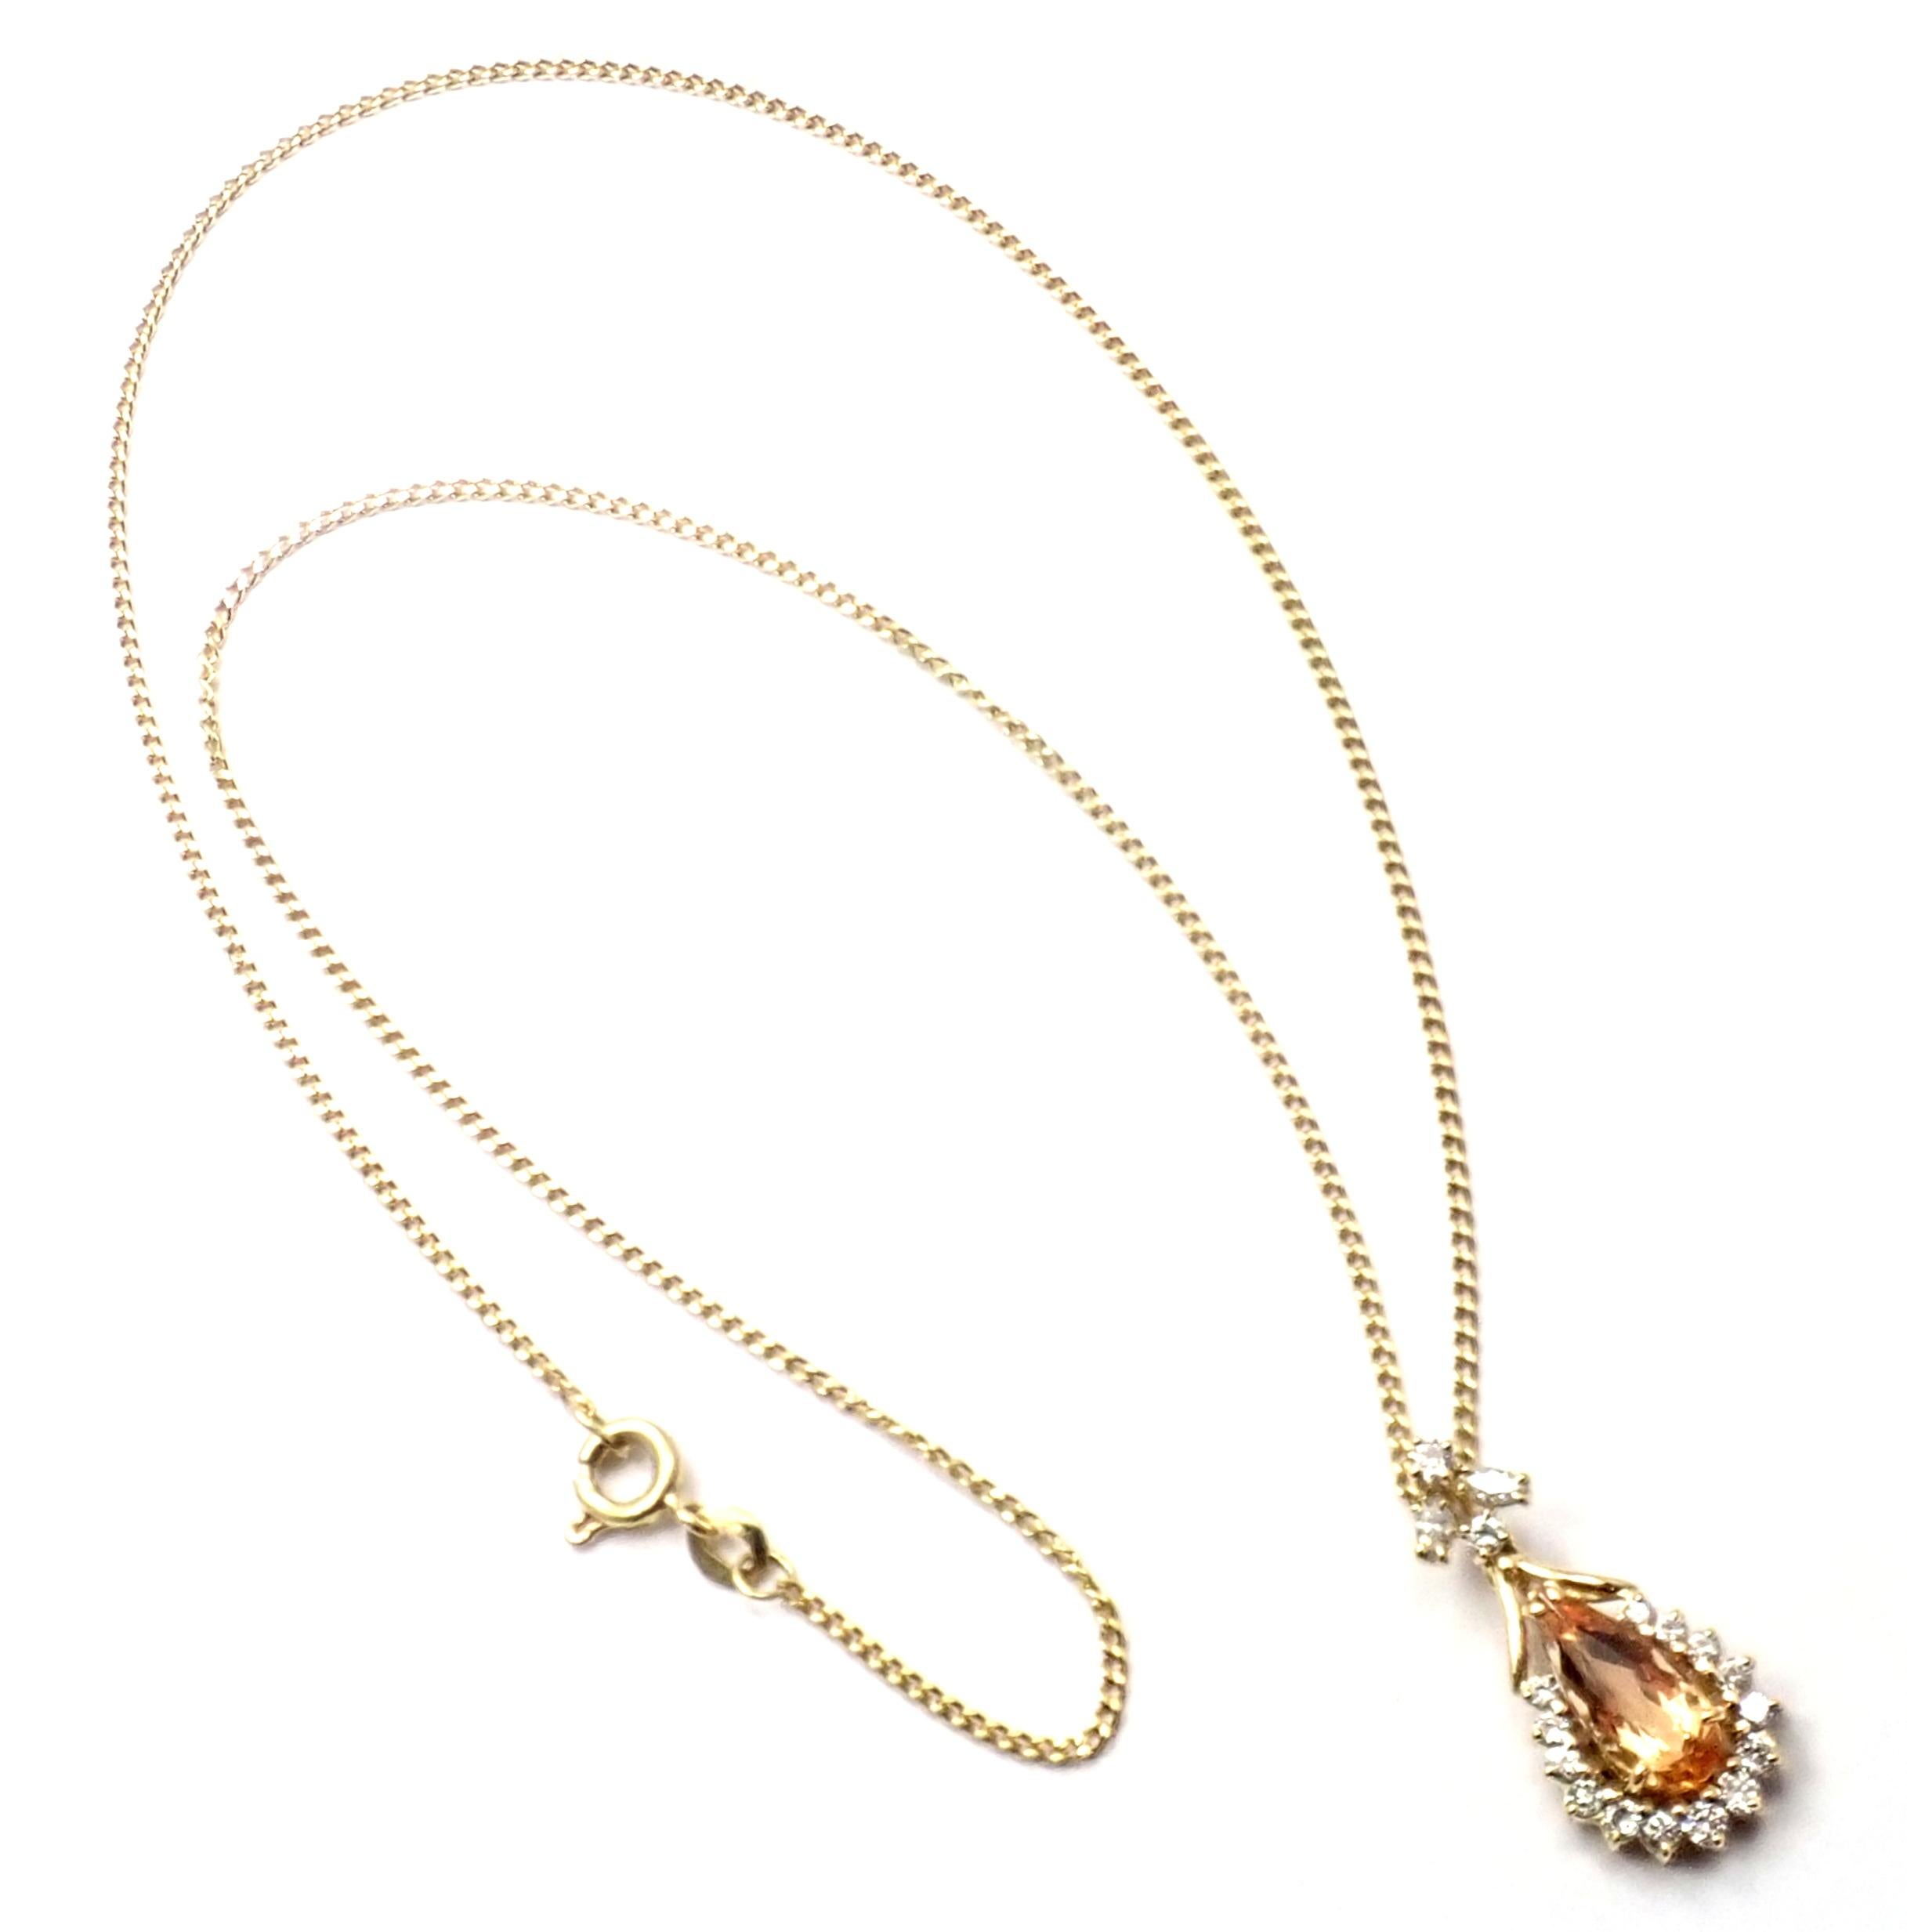 18k Yellow Gold Diamond Imperial Topaz Pendant Necklace by H. Stern. 
With 16 round brilliant cut diamonds & 2 marque shape diamonds VS1 clarity, G color total weight approx. .40ct
1 pear shape imperial topaz total weight 2ct
Details: 
Length: